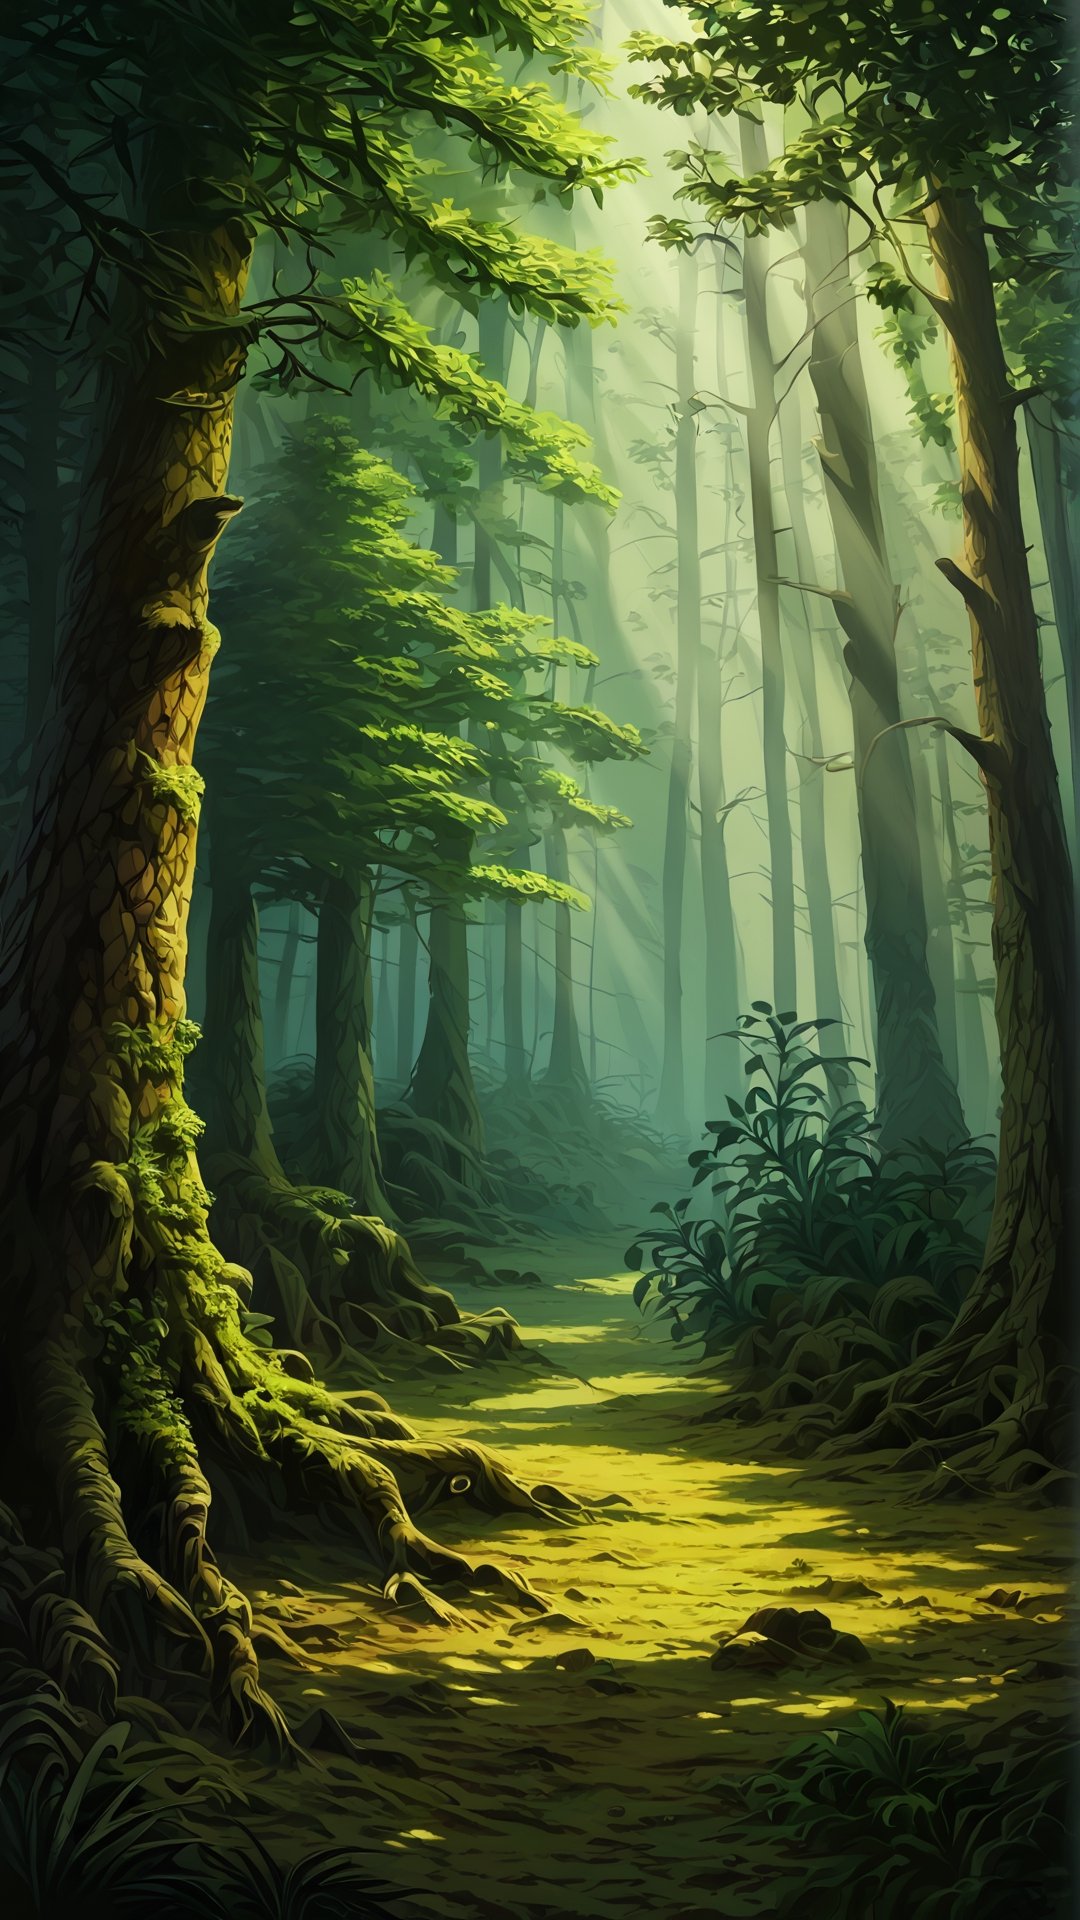 Create a captivating LOFI digital landscape illustration featuring a serene forest scene. Picture a dense forest bathed in the warm glow of the setting sun. Include elements like tall trees with lush green foliage, a cozy cabin nestled among the trees, and soft rays of sunlight filtering through the branches. Emphasize the peaceful atmosphere with gentle shadows and a serene color palette. Capture the tranquility and beauty of nature in the golden hour, highlighting the harmony between the natural environment and human habitation. Use subtle textures and a nostalgic vibe to enhance the LOFI aesthetic, creating a timeless and soothing artwork.